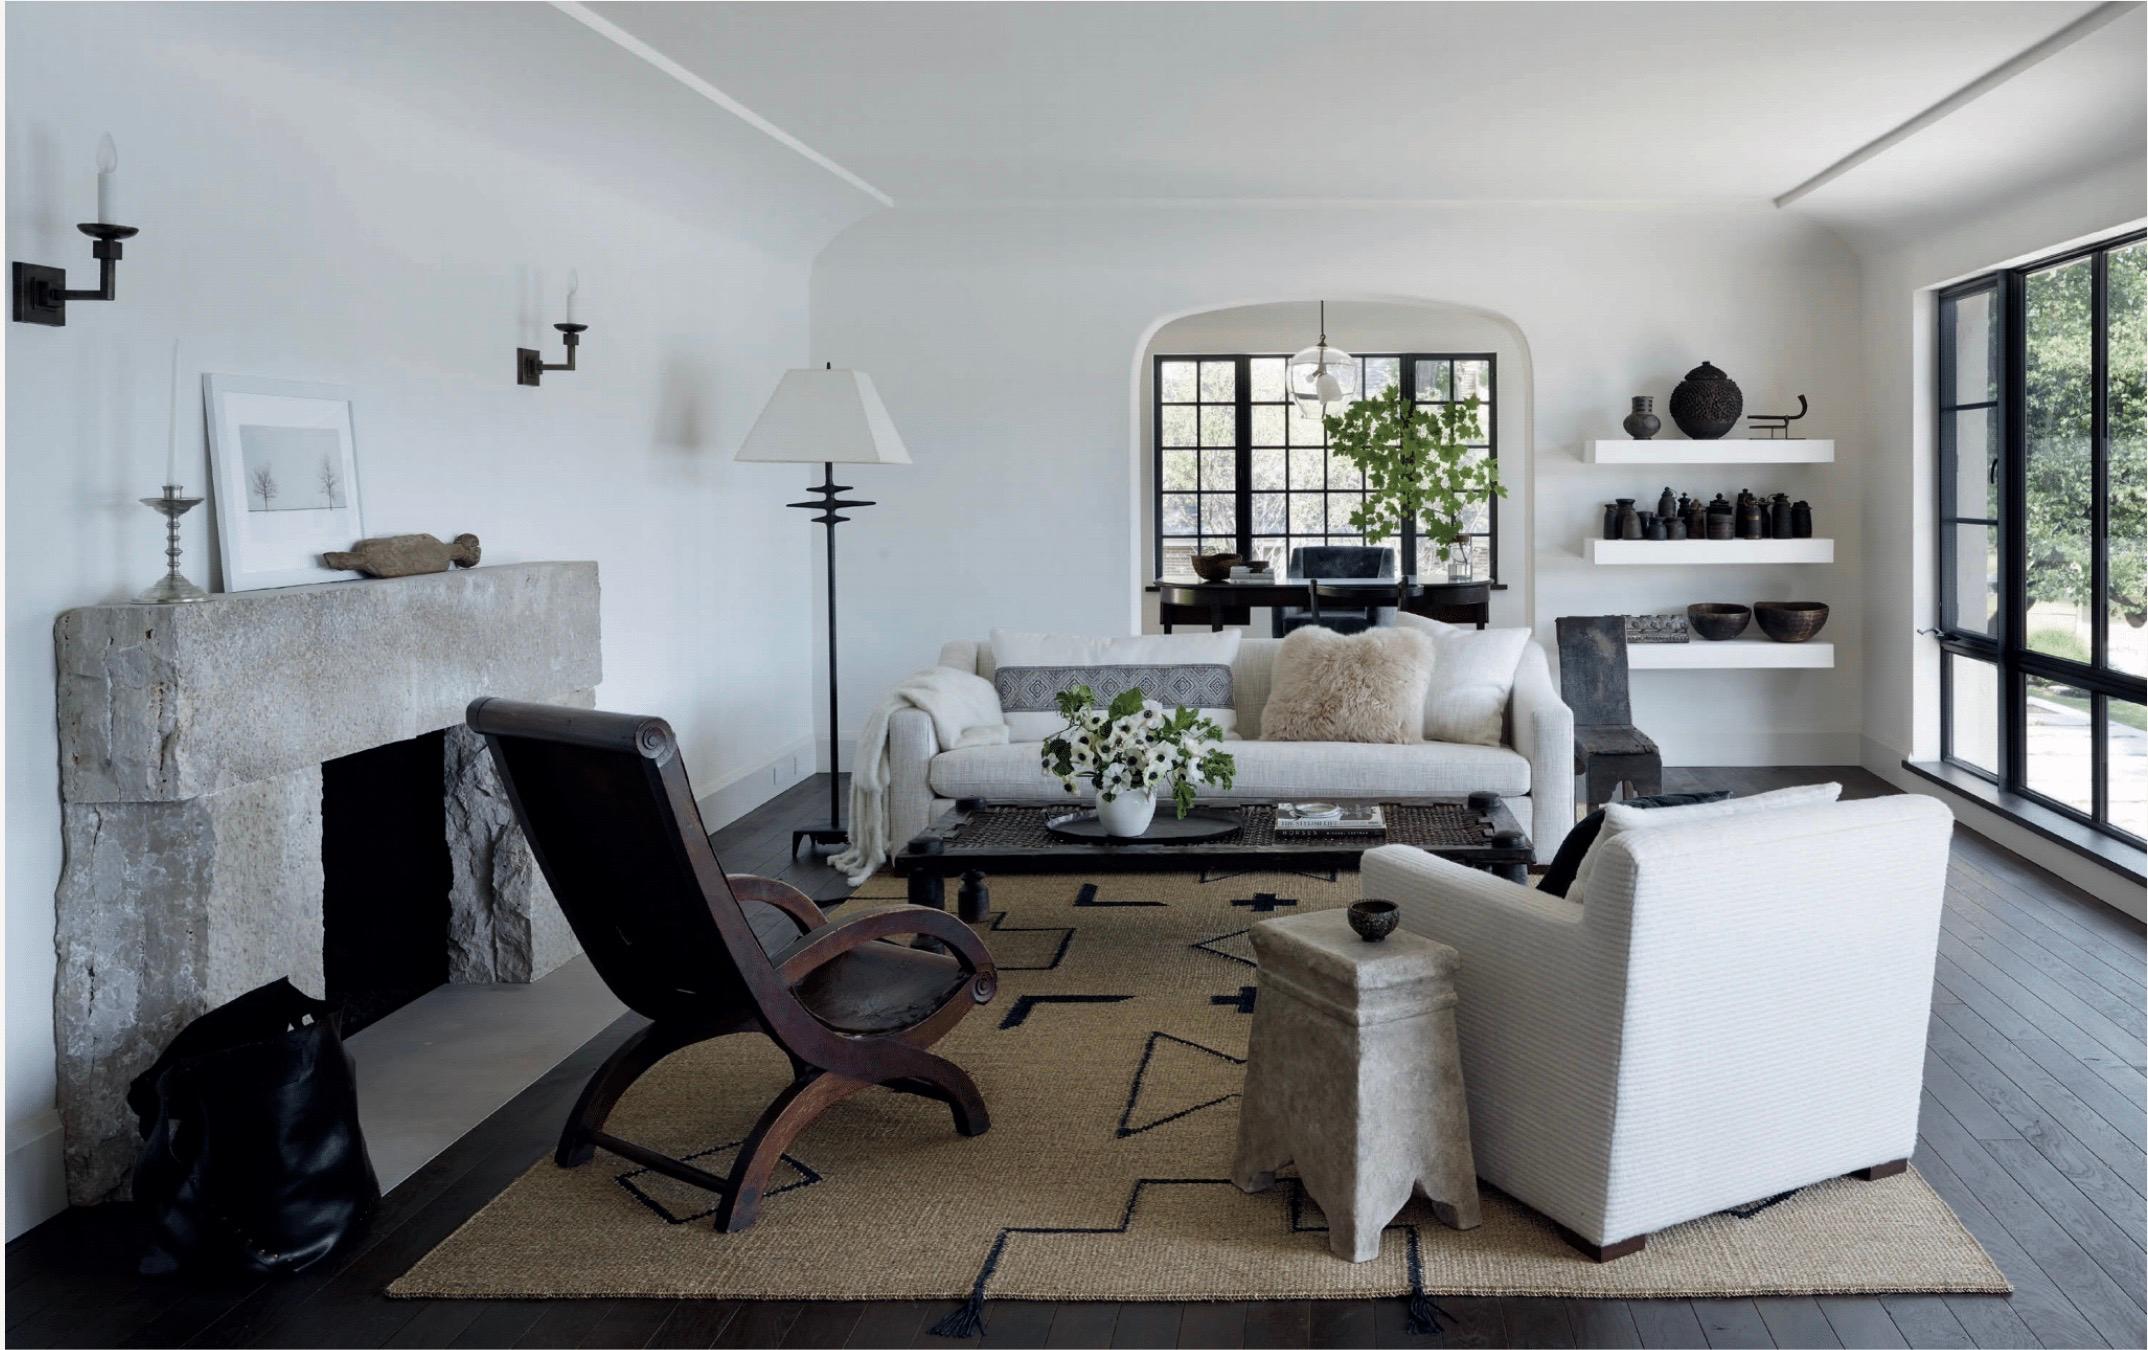 Interiors designed by Michael Del Piero are full of delightful contradictions. She designs minimalist rooms rich with historical character, meticulously edited gallery-like spaces that still have the comforting warmth of home, and breezy abodes with